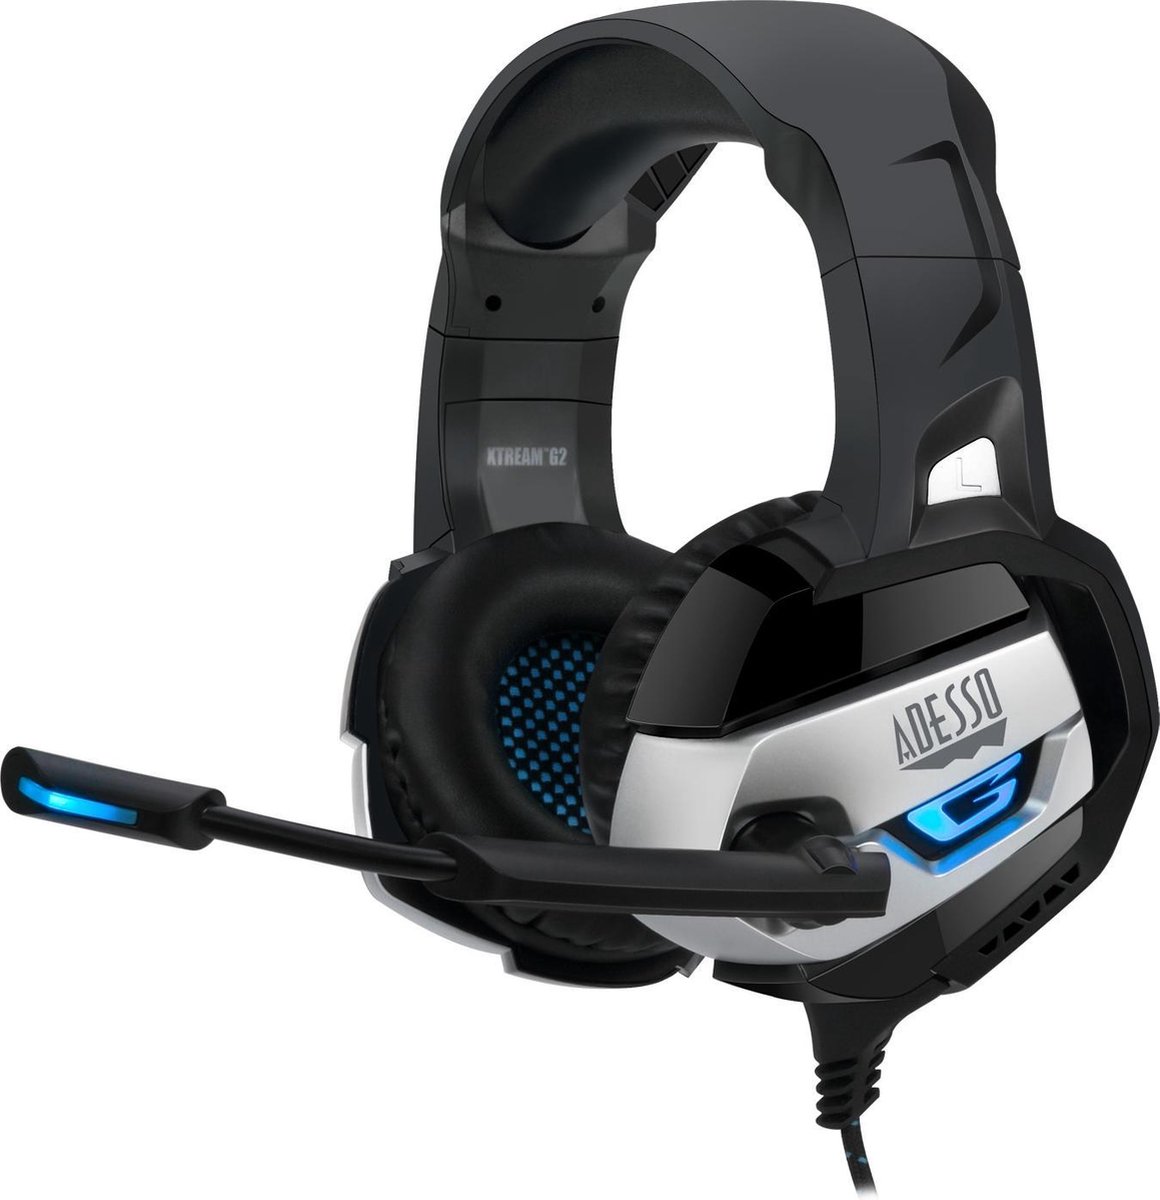 Adesso XTREAM G2 gaming headset met microfoon